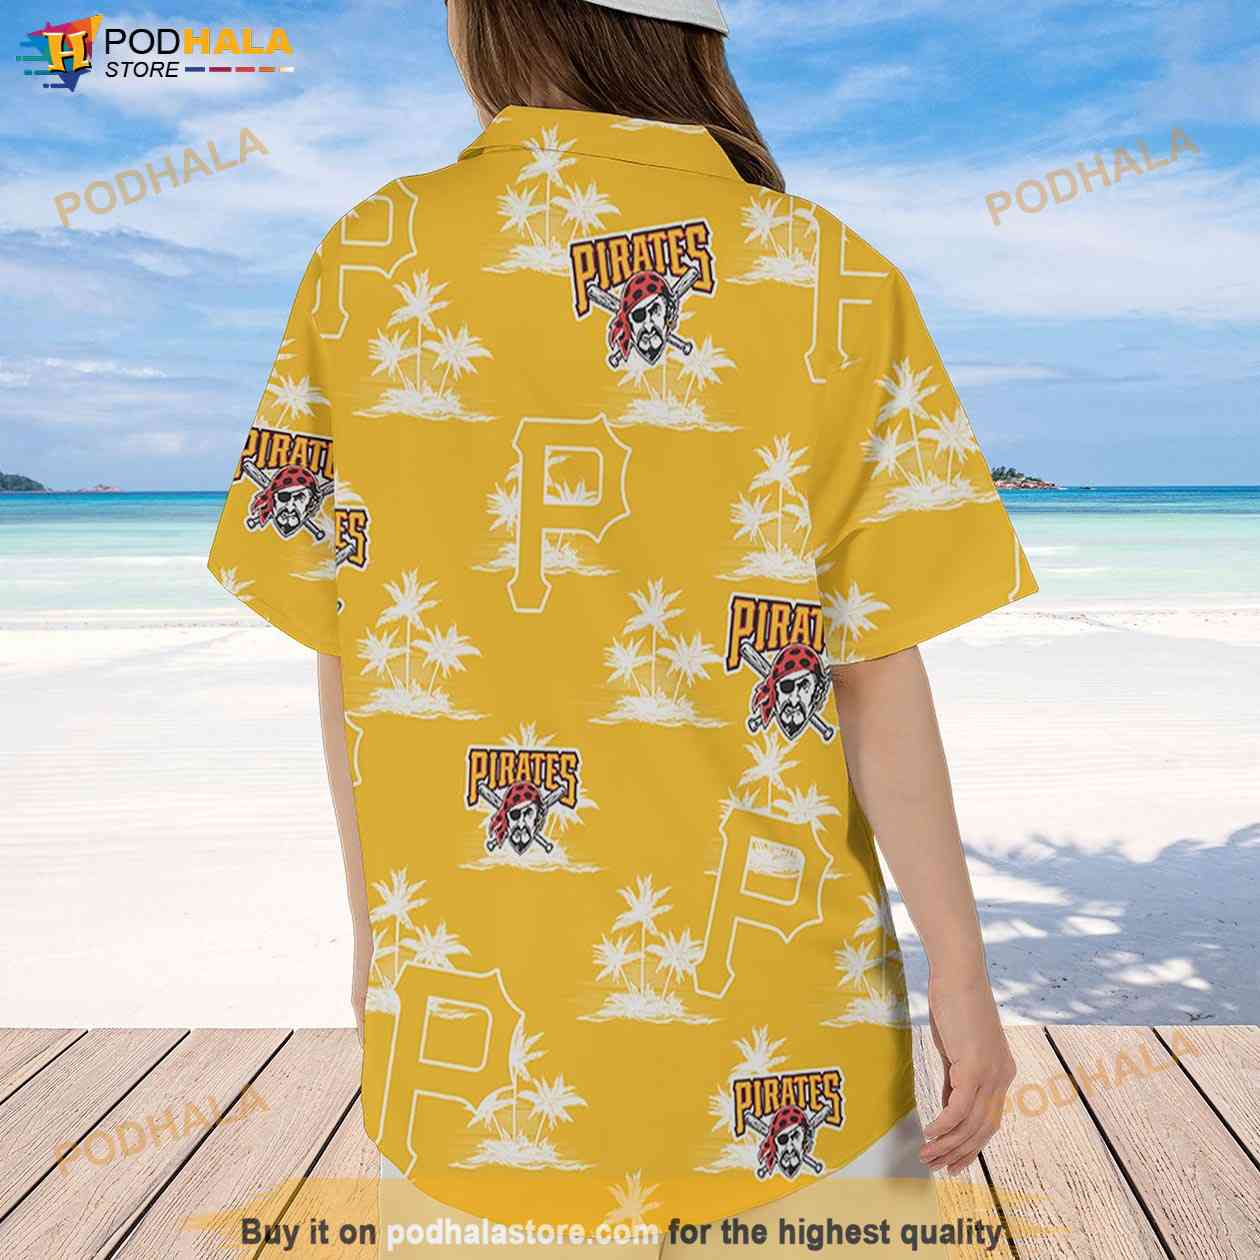 Orioles Hawaiian Shirt Coconut Tree Pattern Baltimore Orioles Gift -  Personalized Gifts: Family, Sports, Occasions, Trending